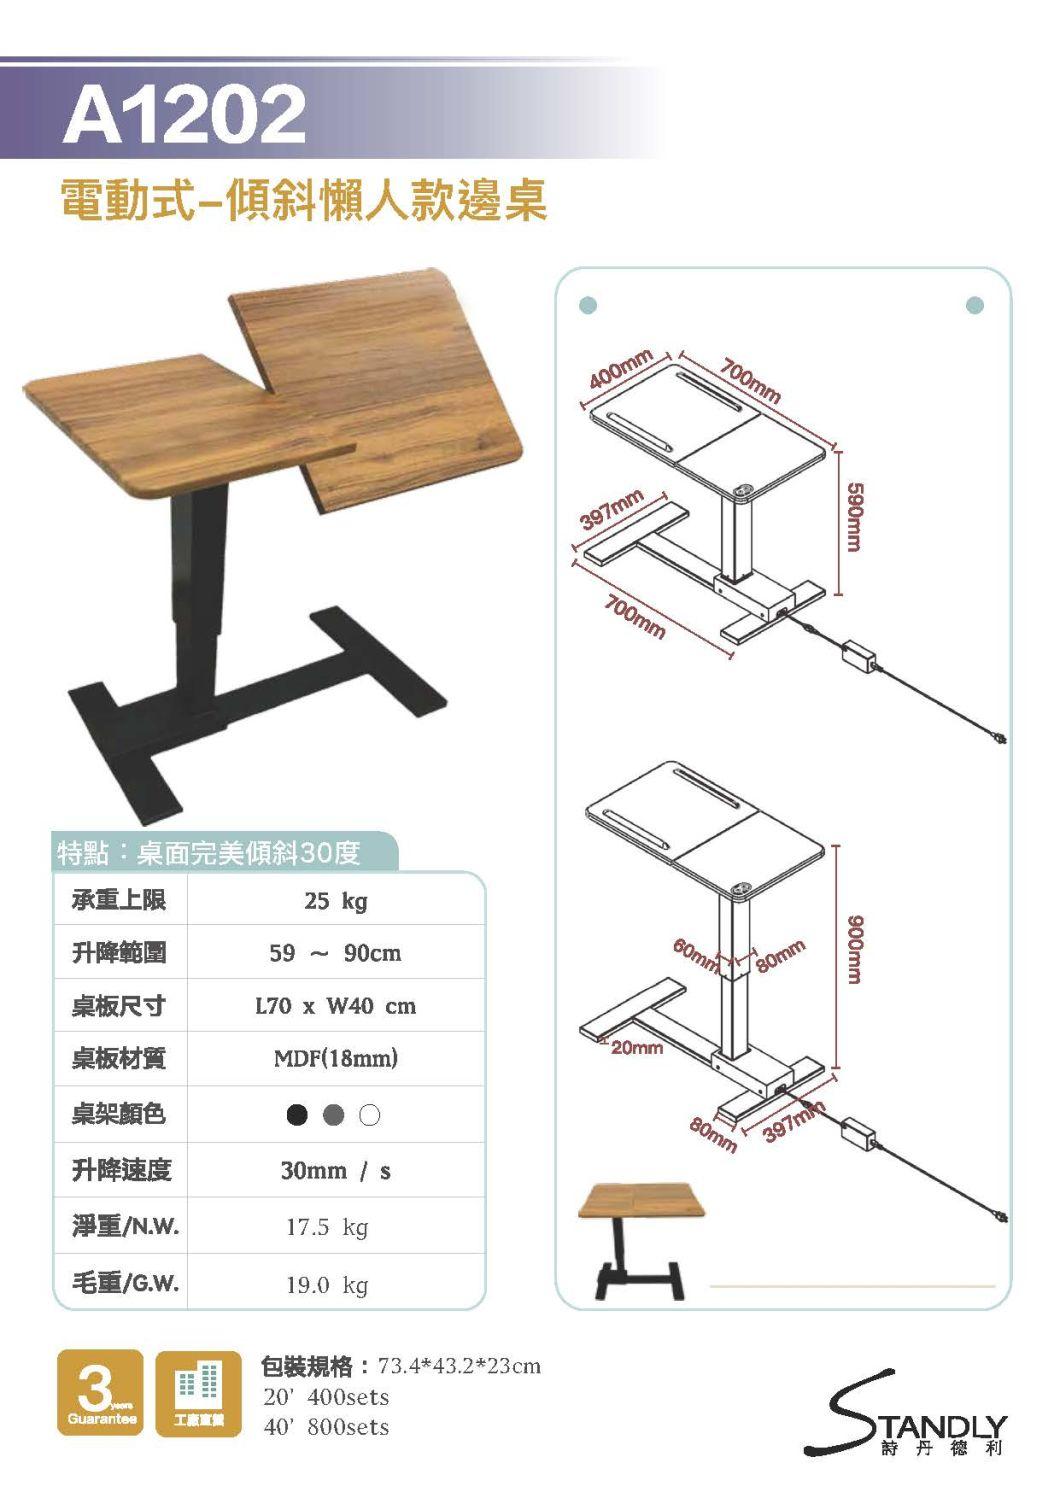 Manual Patented Screw Rod Movable Lifting Side Table /Hospital Furniture